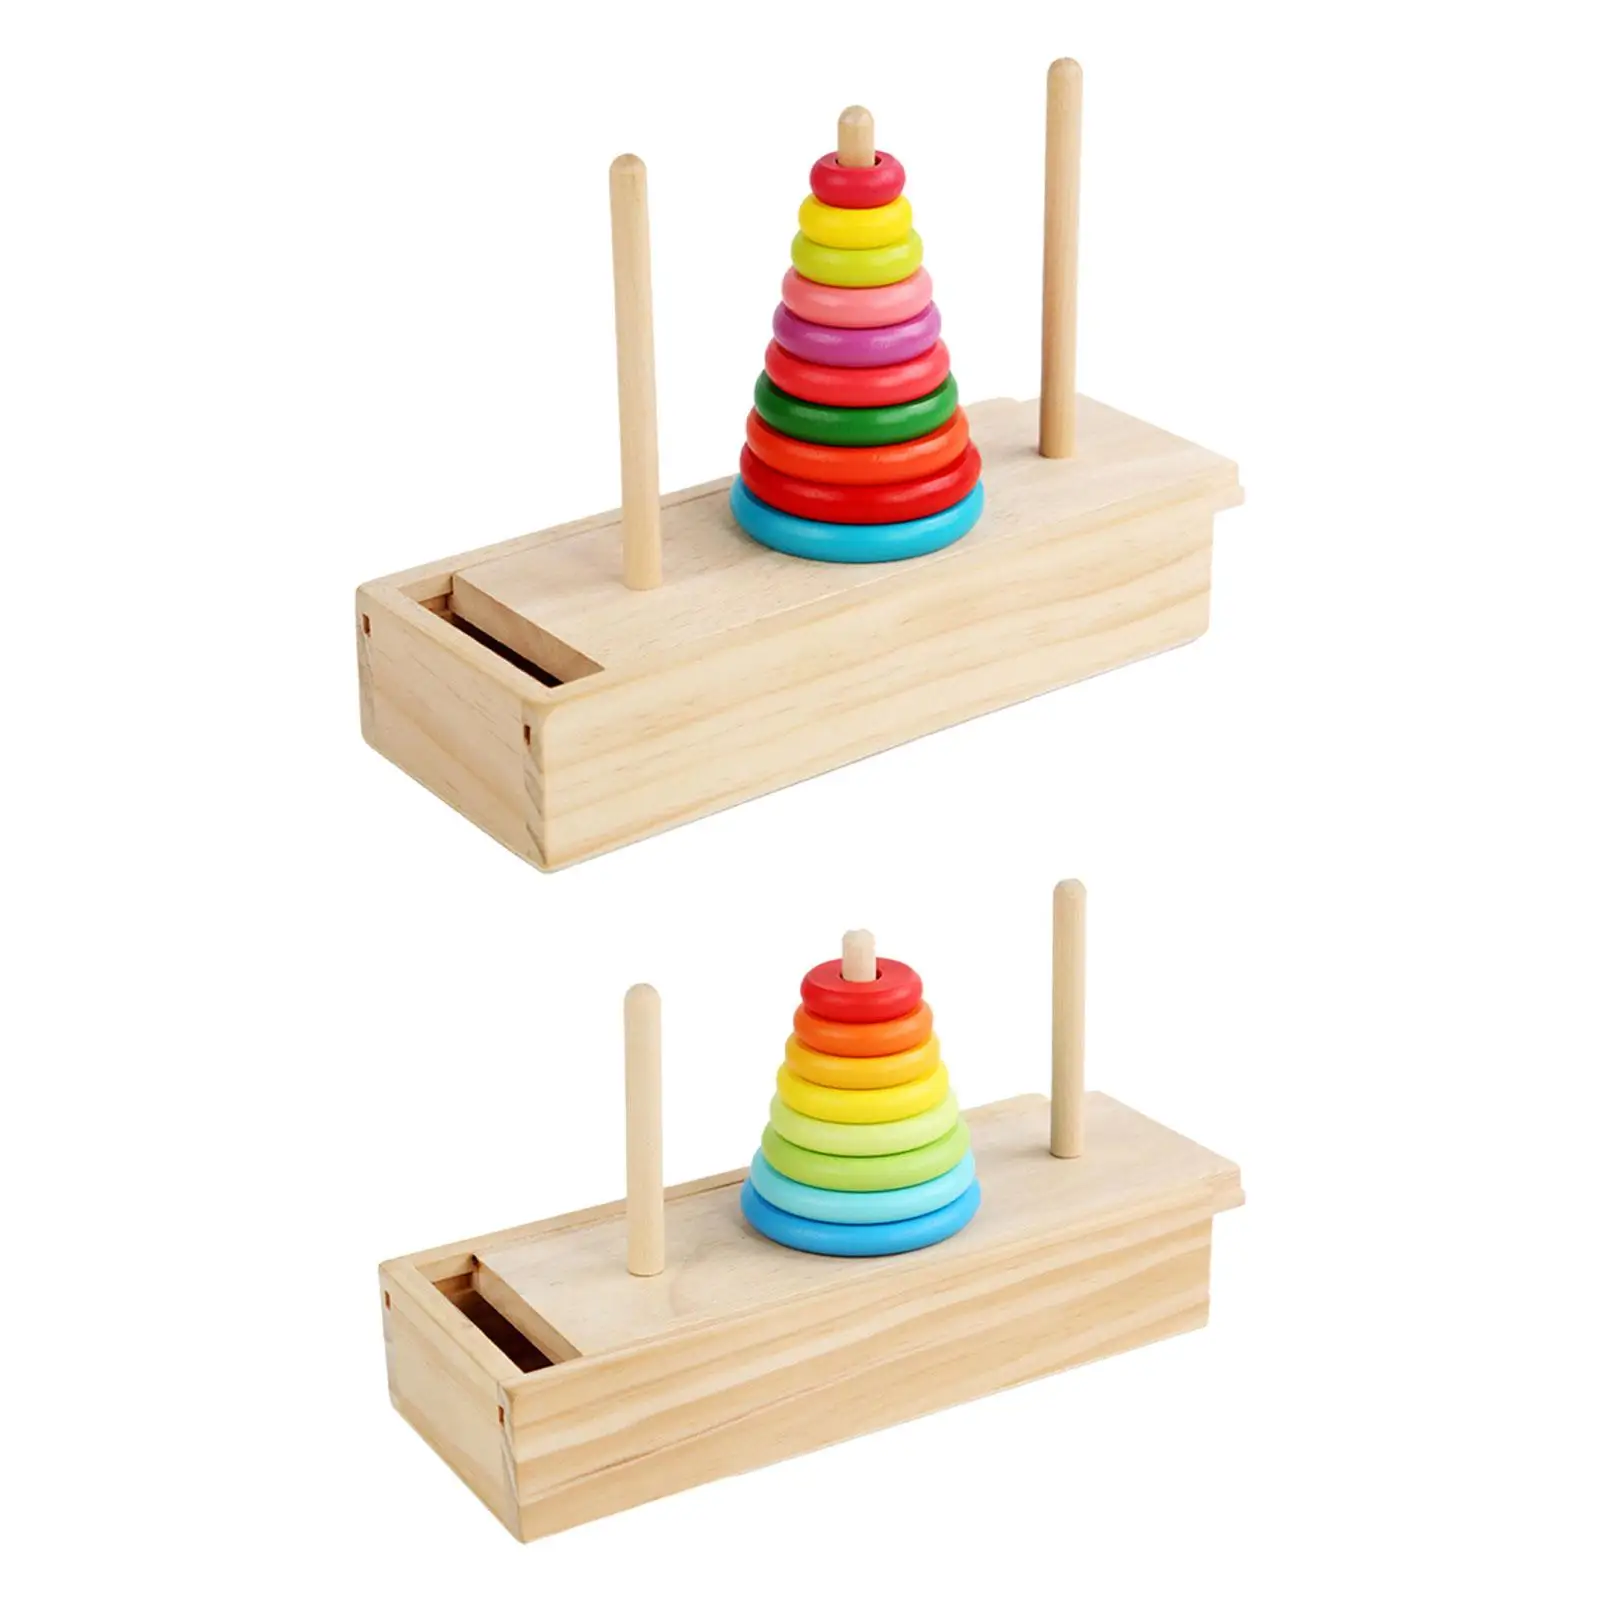 Wooden Stacking Tower Sturdy Portable for Kids Boys Girls 3 Year Old and up